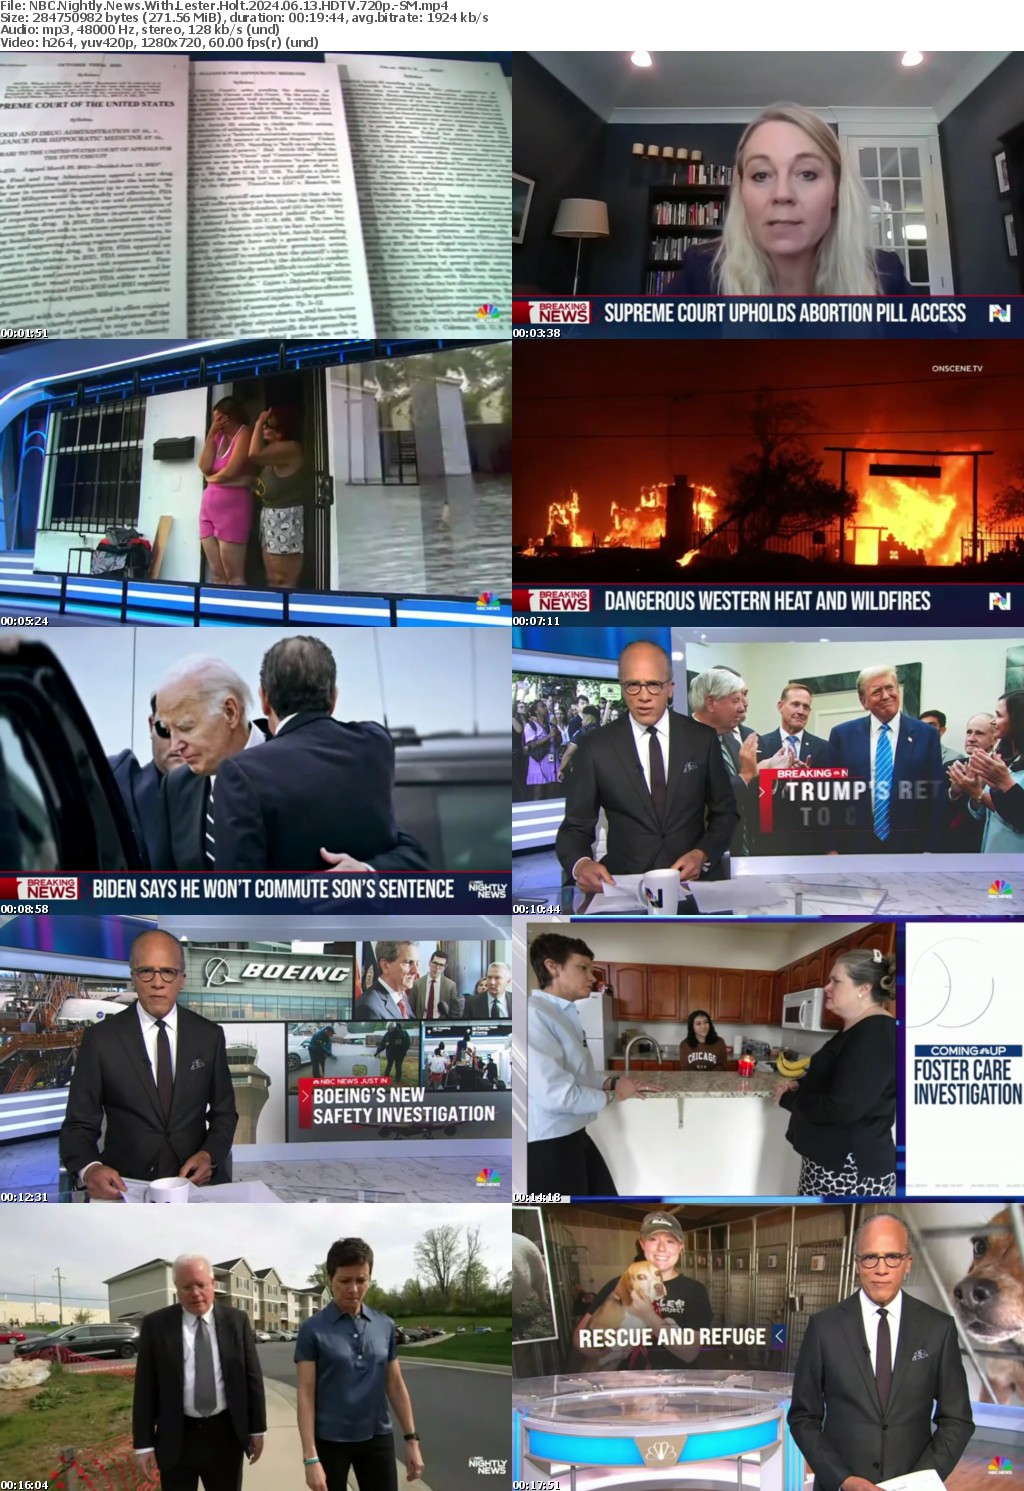 NBC Nightly News With Lester Holt 2024 06 13 HDTV 720p -SM